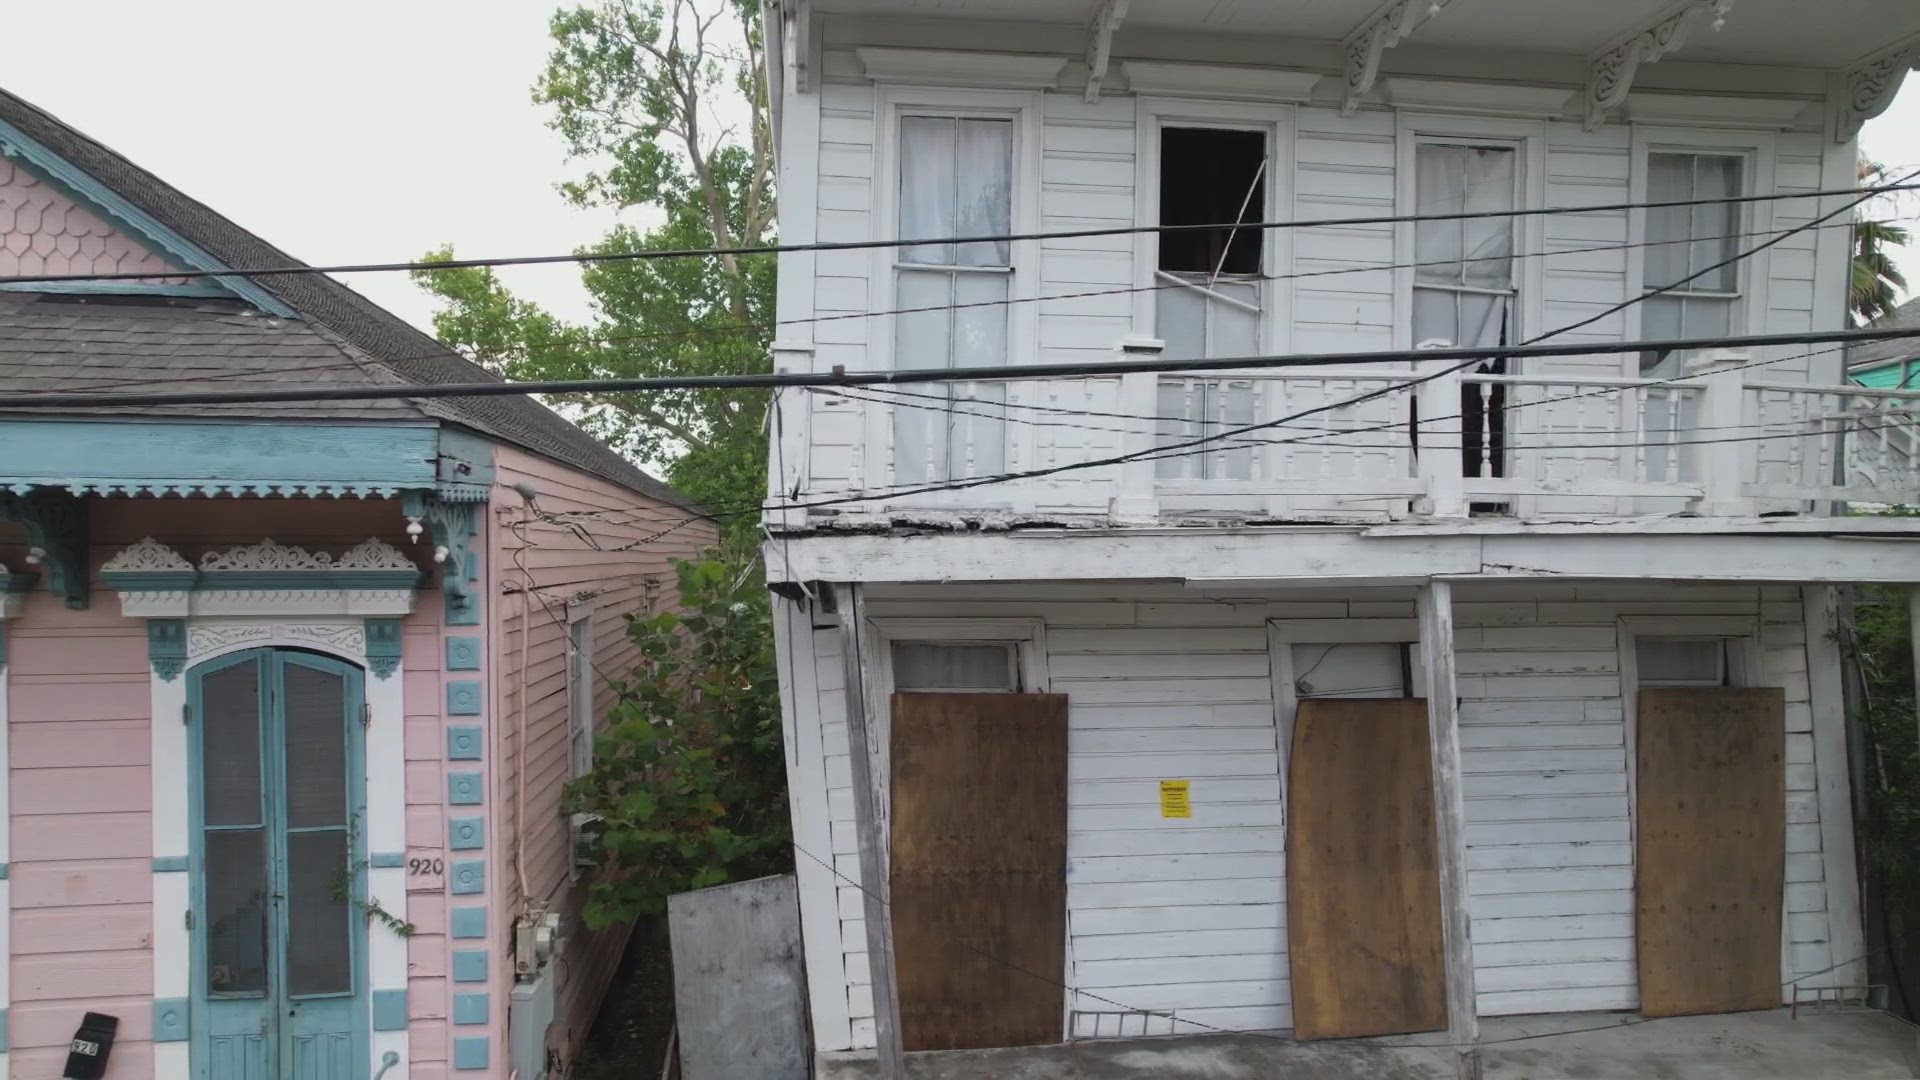 A Bywater property is so severely damaged neighbors fear it's going to topple onto them.